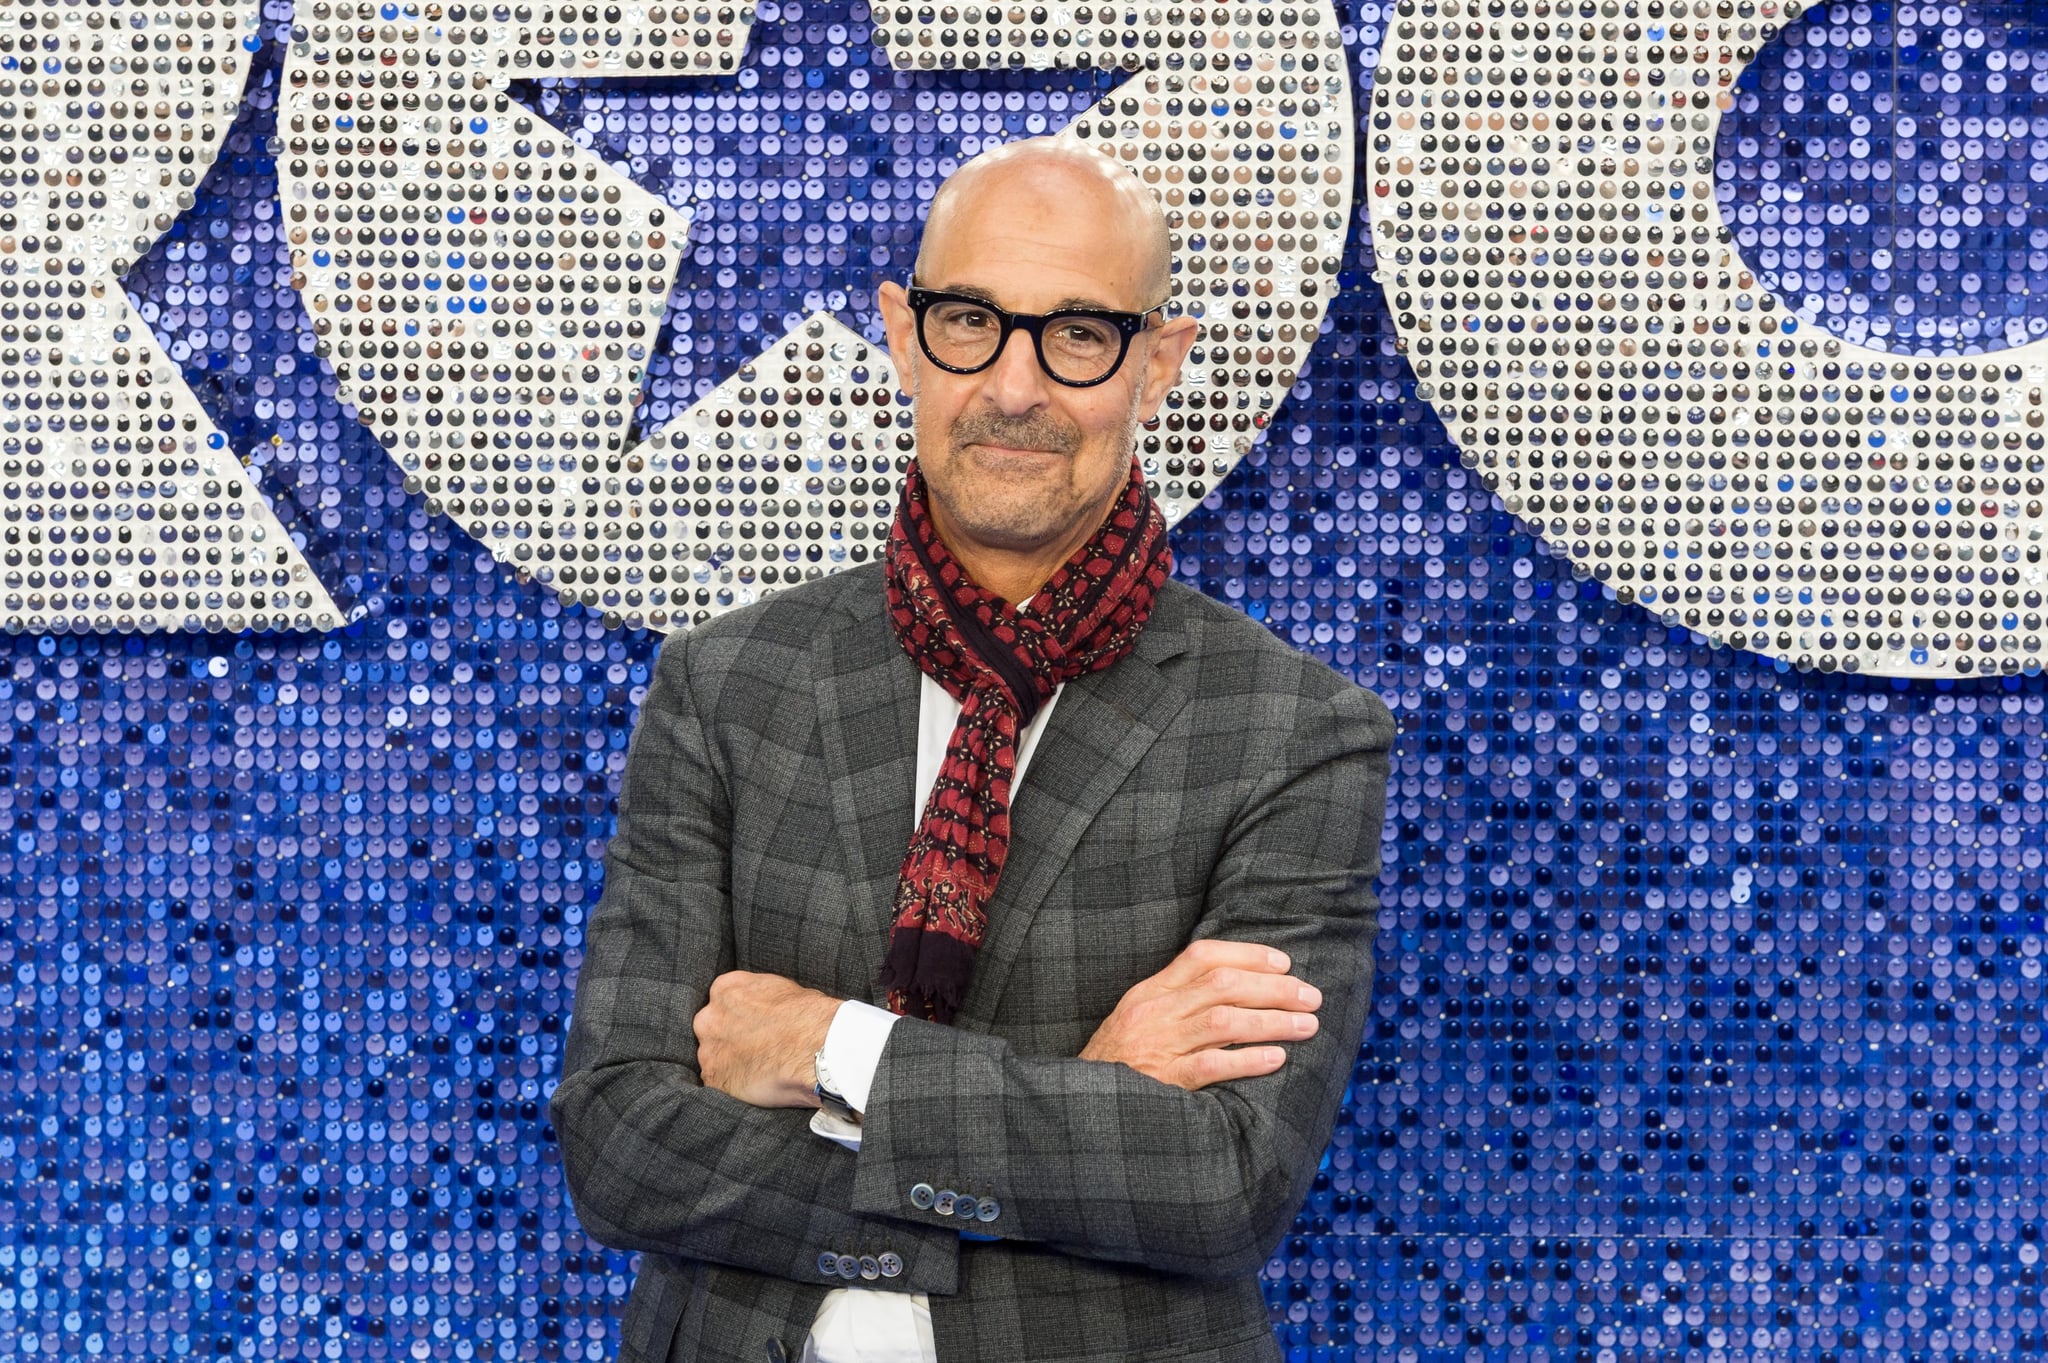 LONDON, UNITED KINGDOM - MAY 20: Stanley Tucci arrives for the UK film premiere of 'Rocketman' at Odeon Luxe, Leicester Square on 20 May, 2019 in London, England. (Photo credit should read Wiktor Szymanowicz / Barcroft Media via Getty Images)